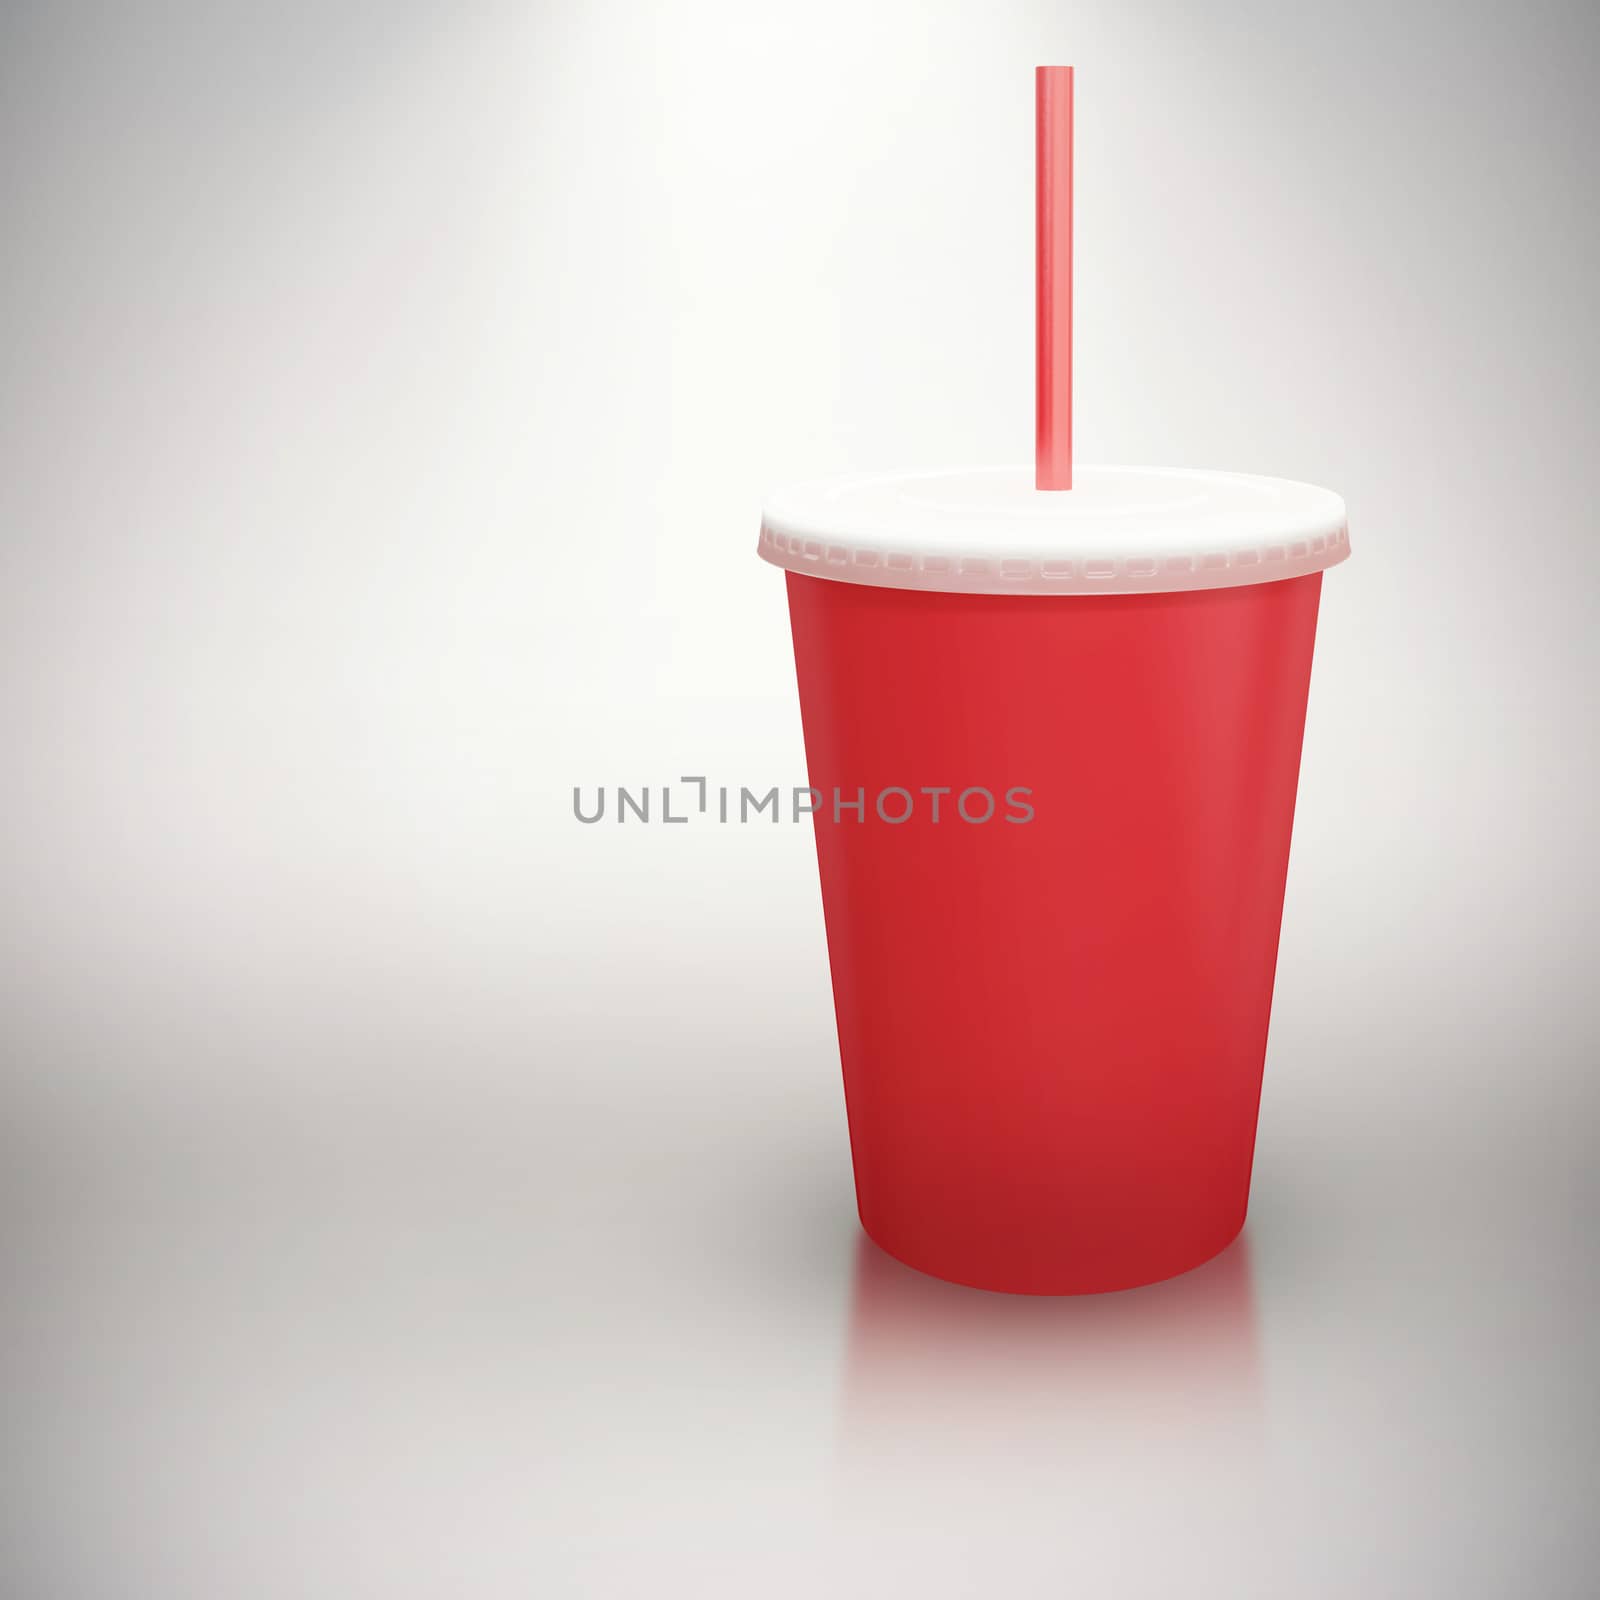 Red cup over white background against grey background